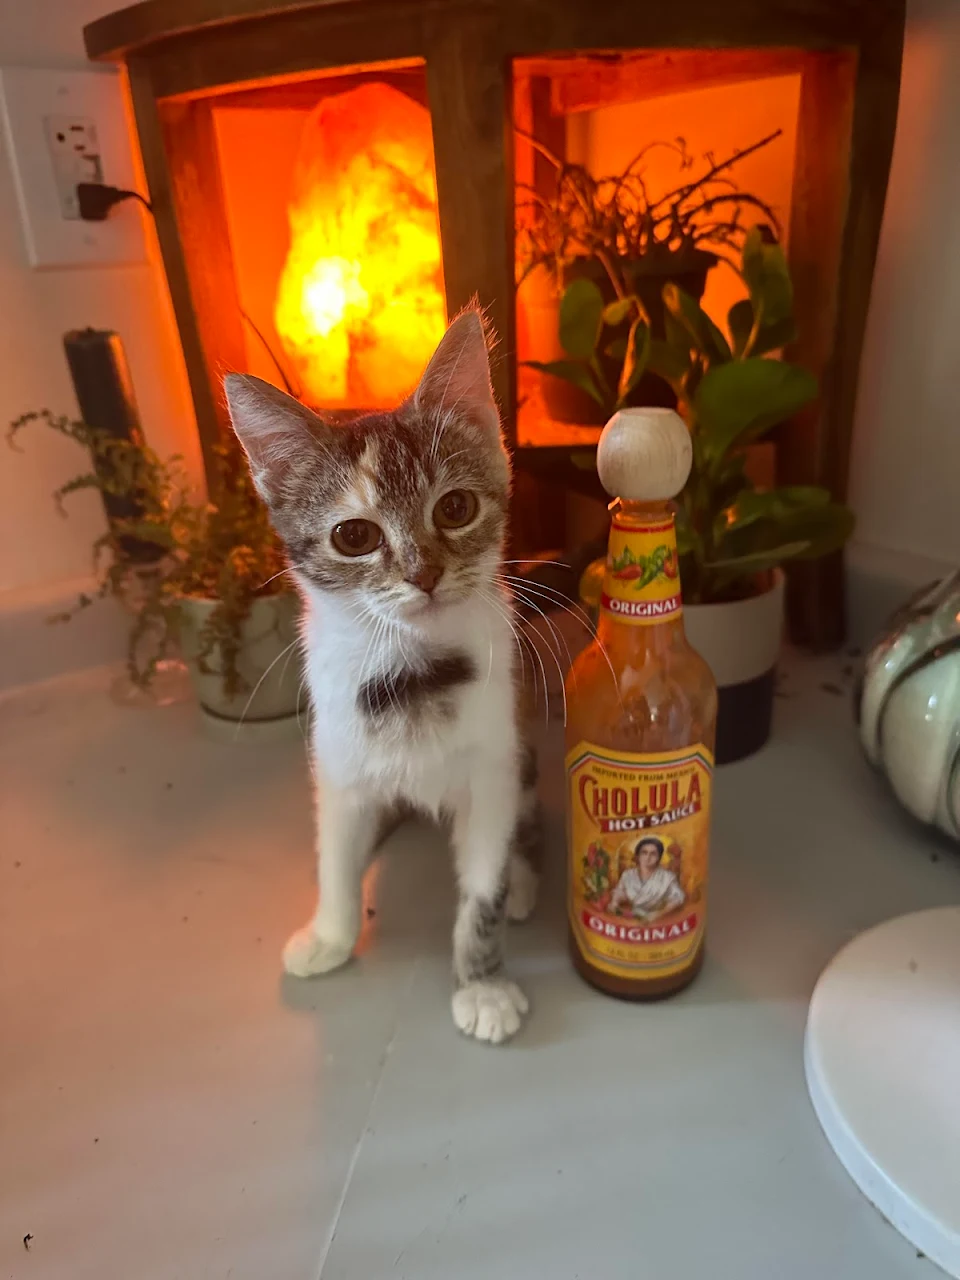 this is cholula